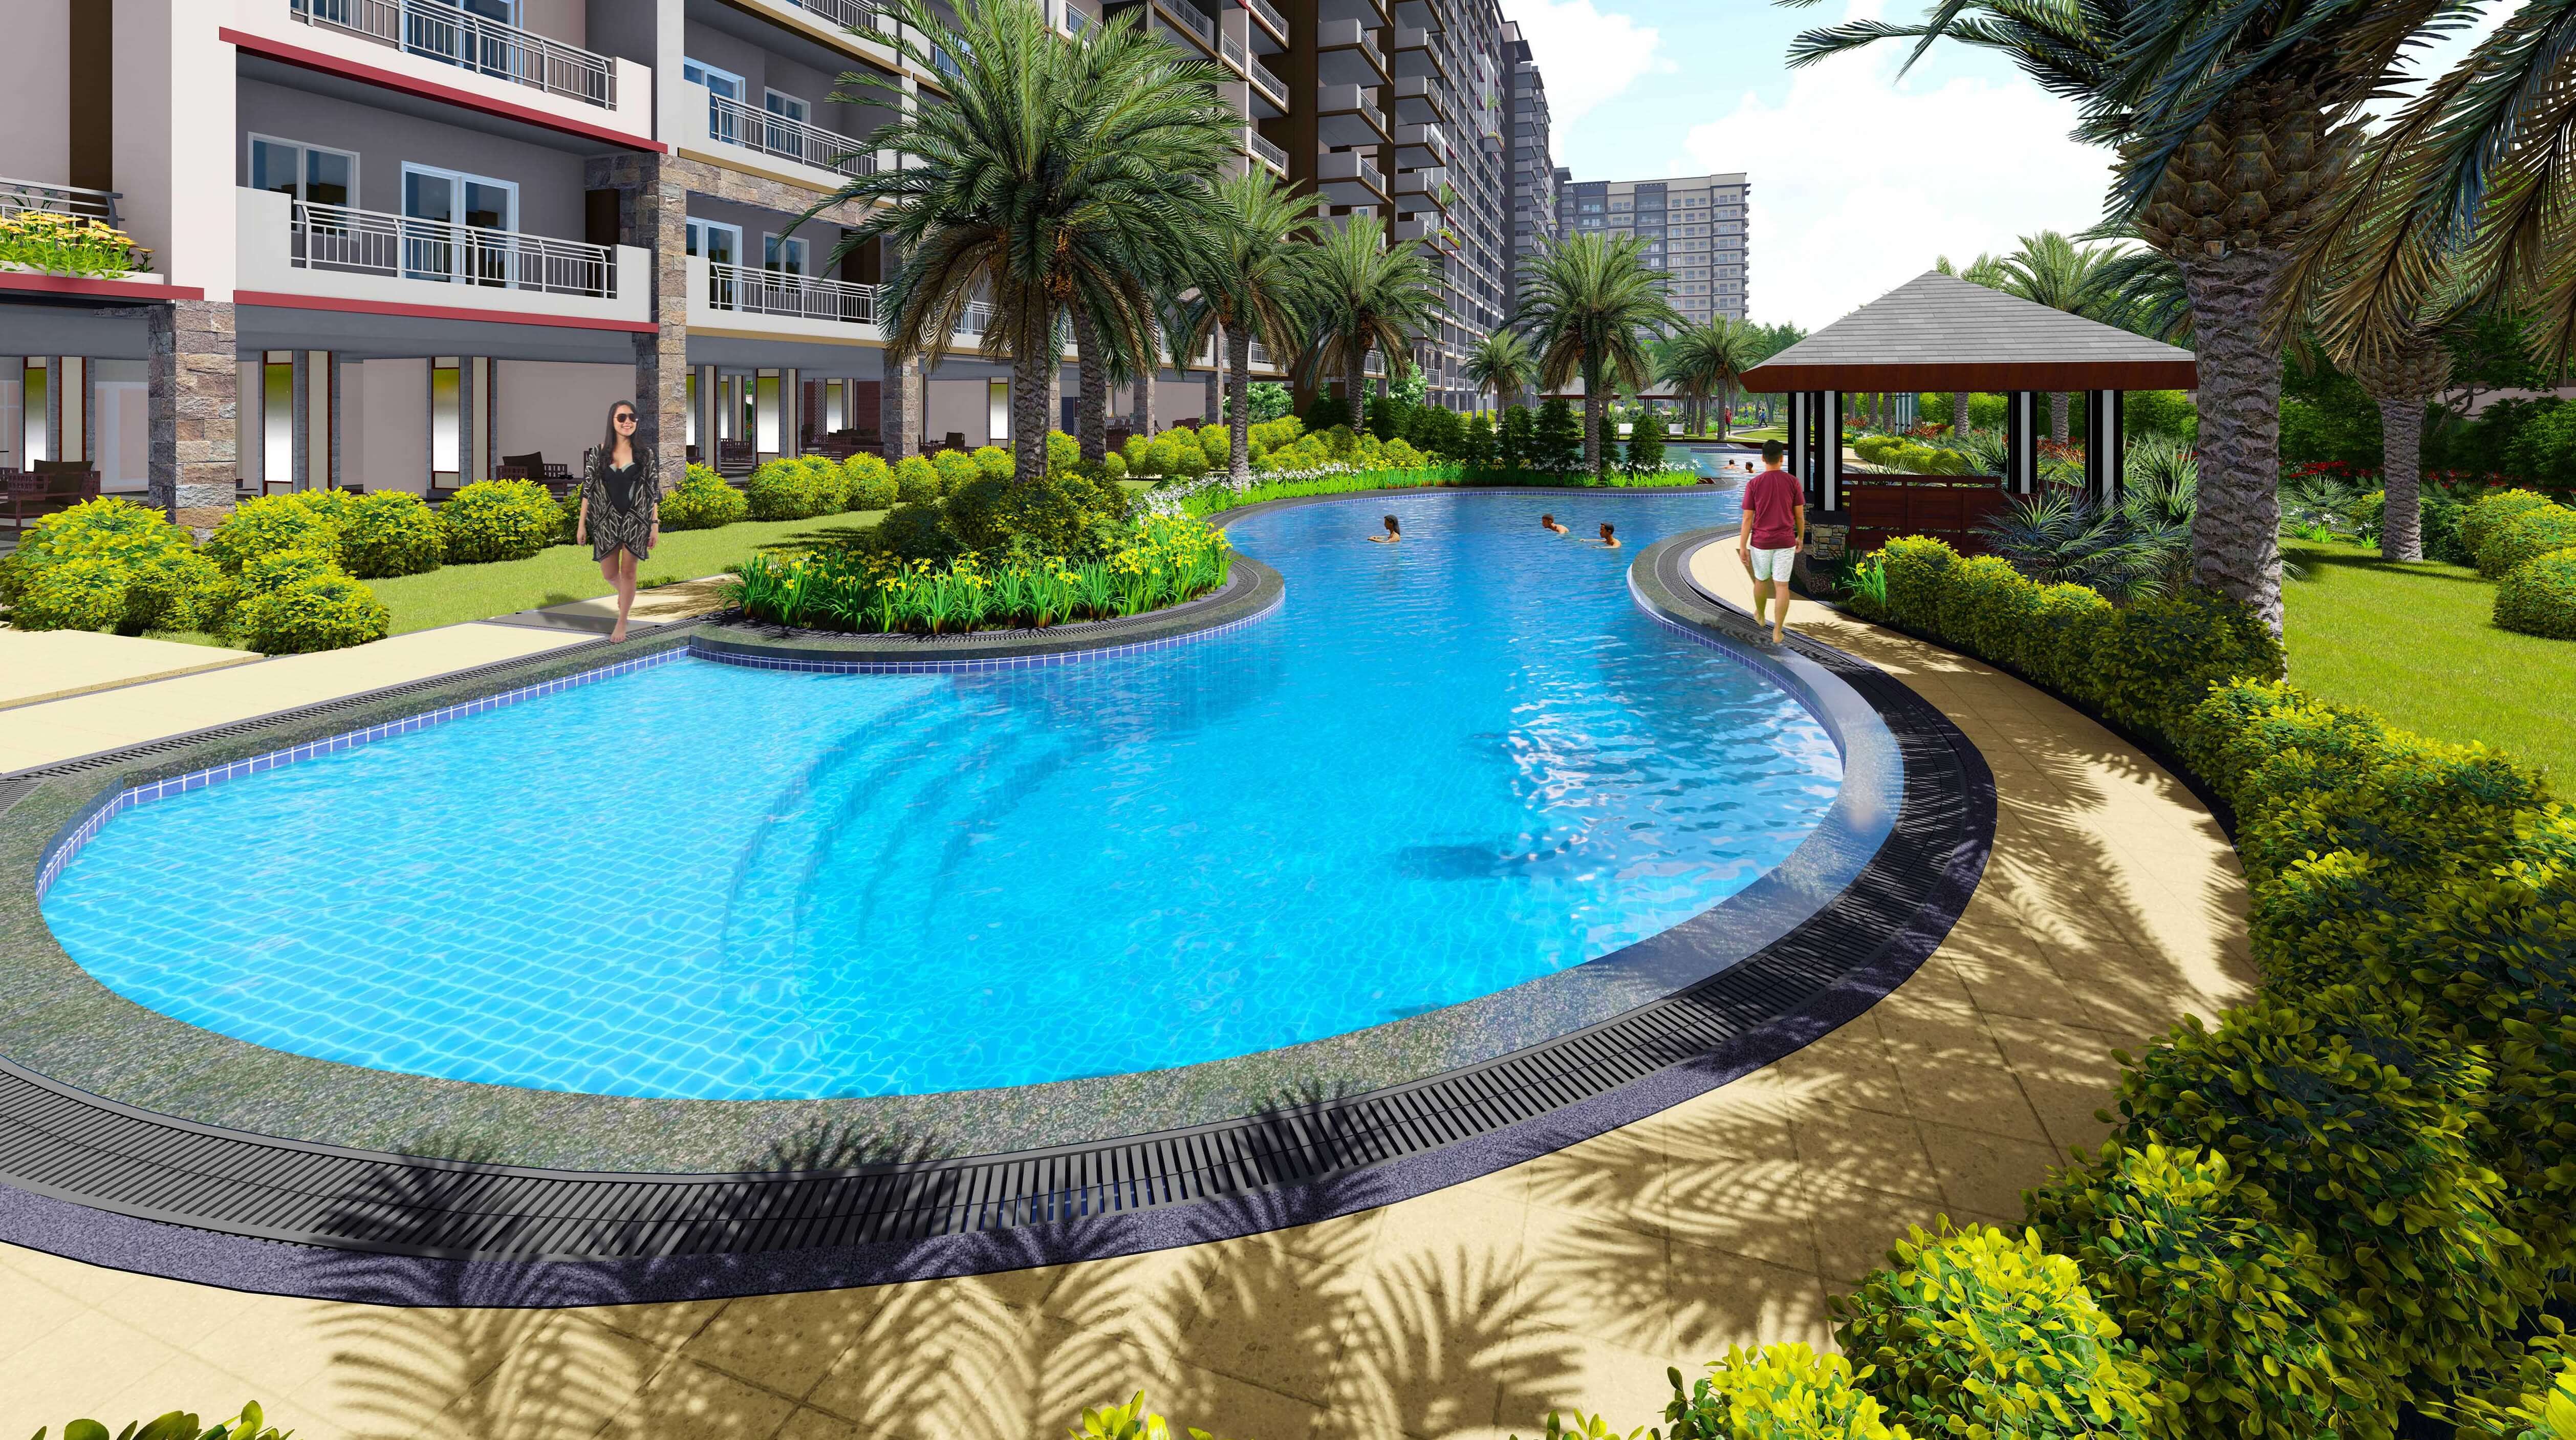 transit-friendly-dmci-homes-pasig-condo-offers-easy-access-to-key-places-in-the-metro-1569820382438